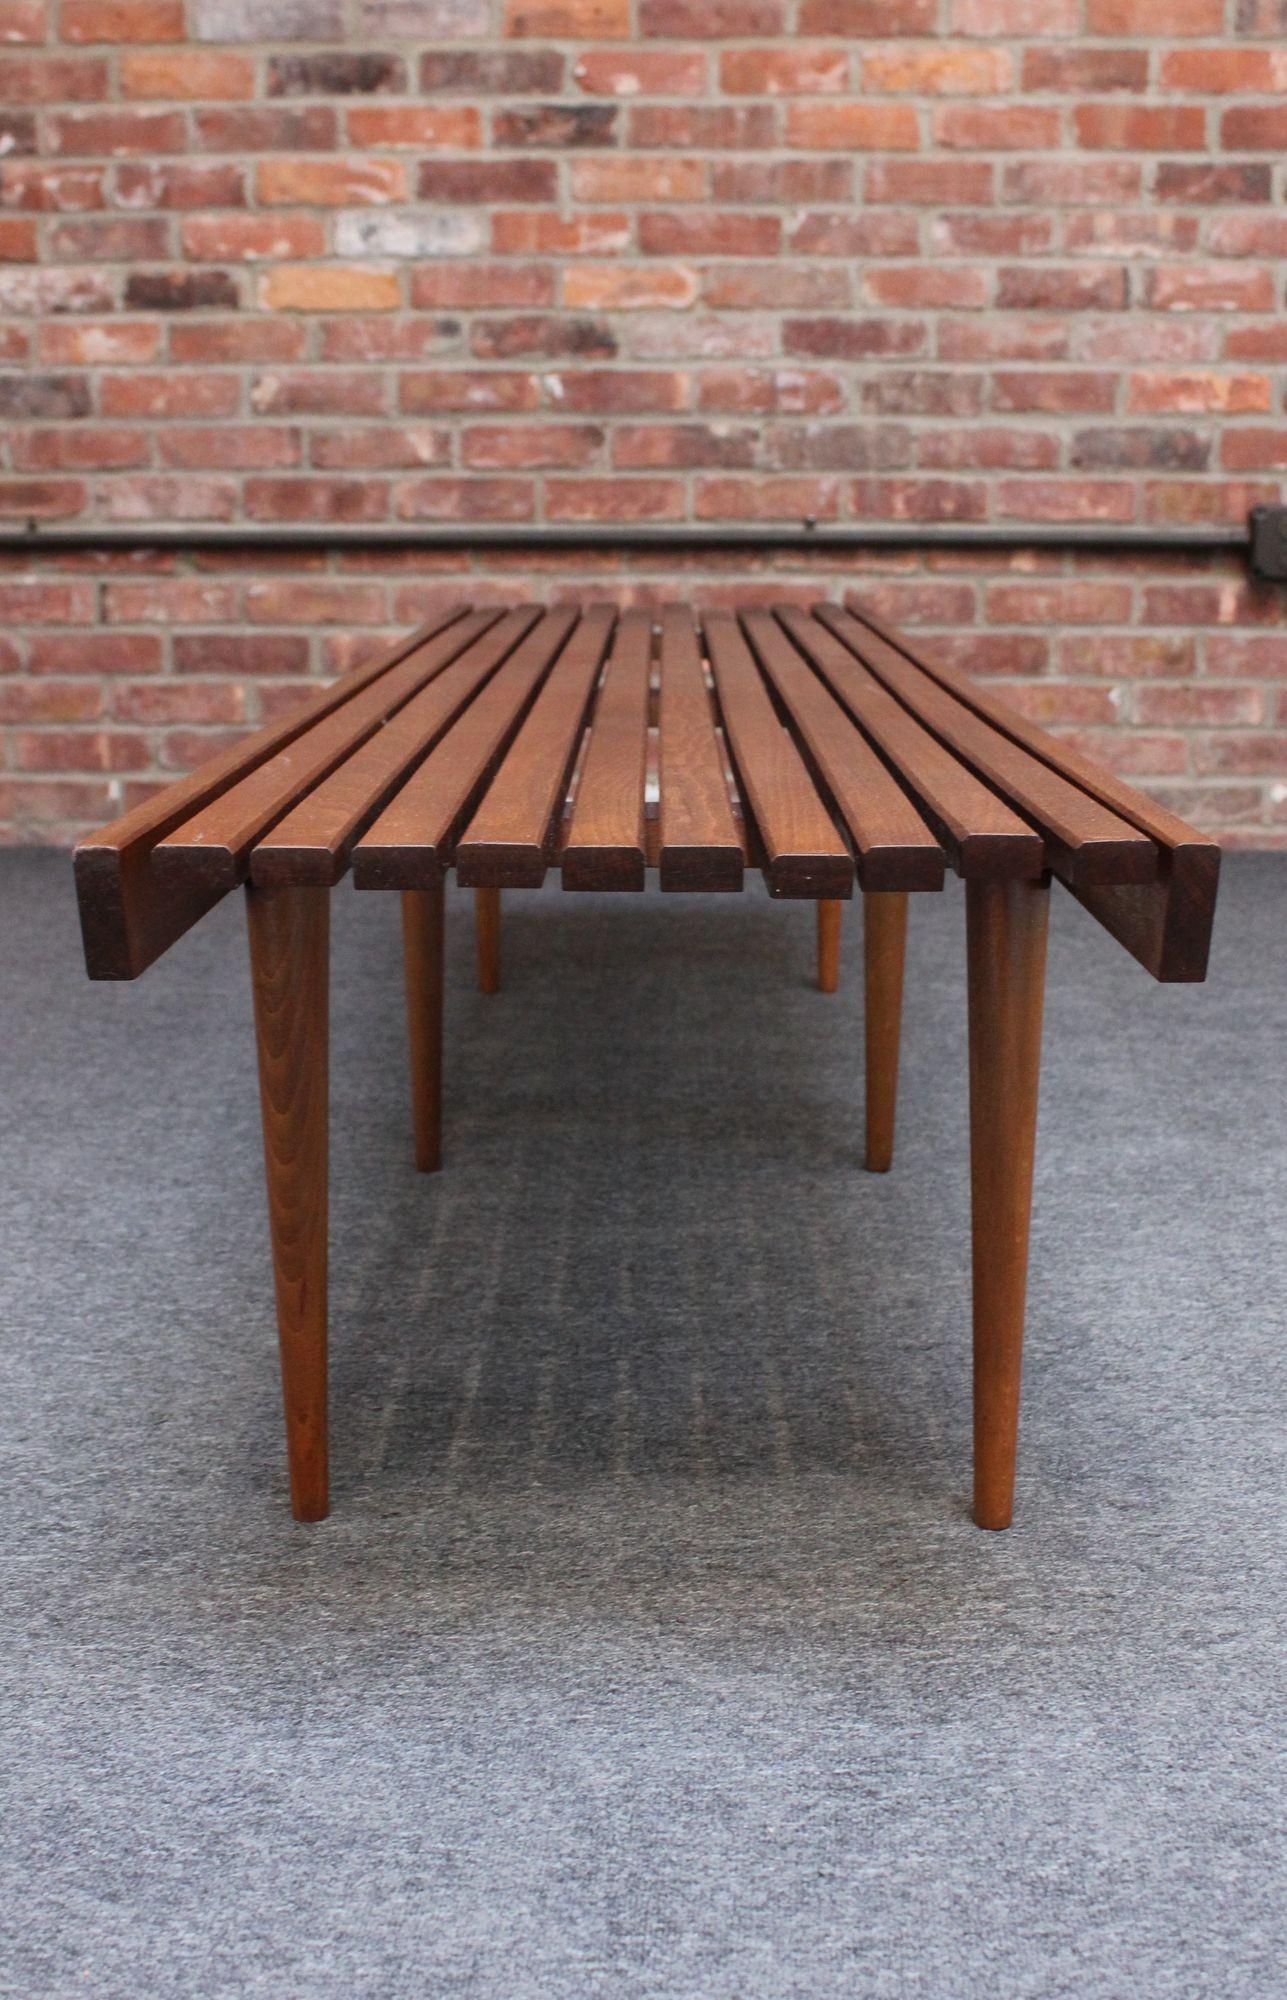 Mid-20th Century Long Mid-Century Modern Walnut Slatted Bench / Coffee Table with Tapered Legs For Sale